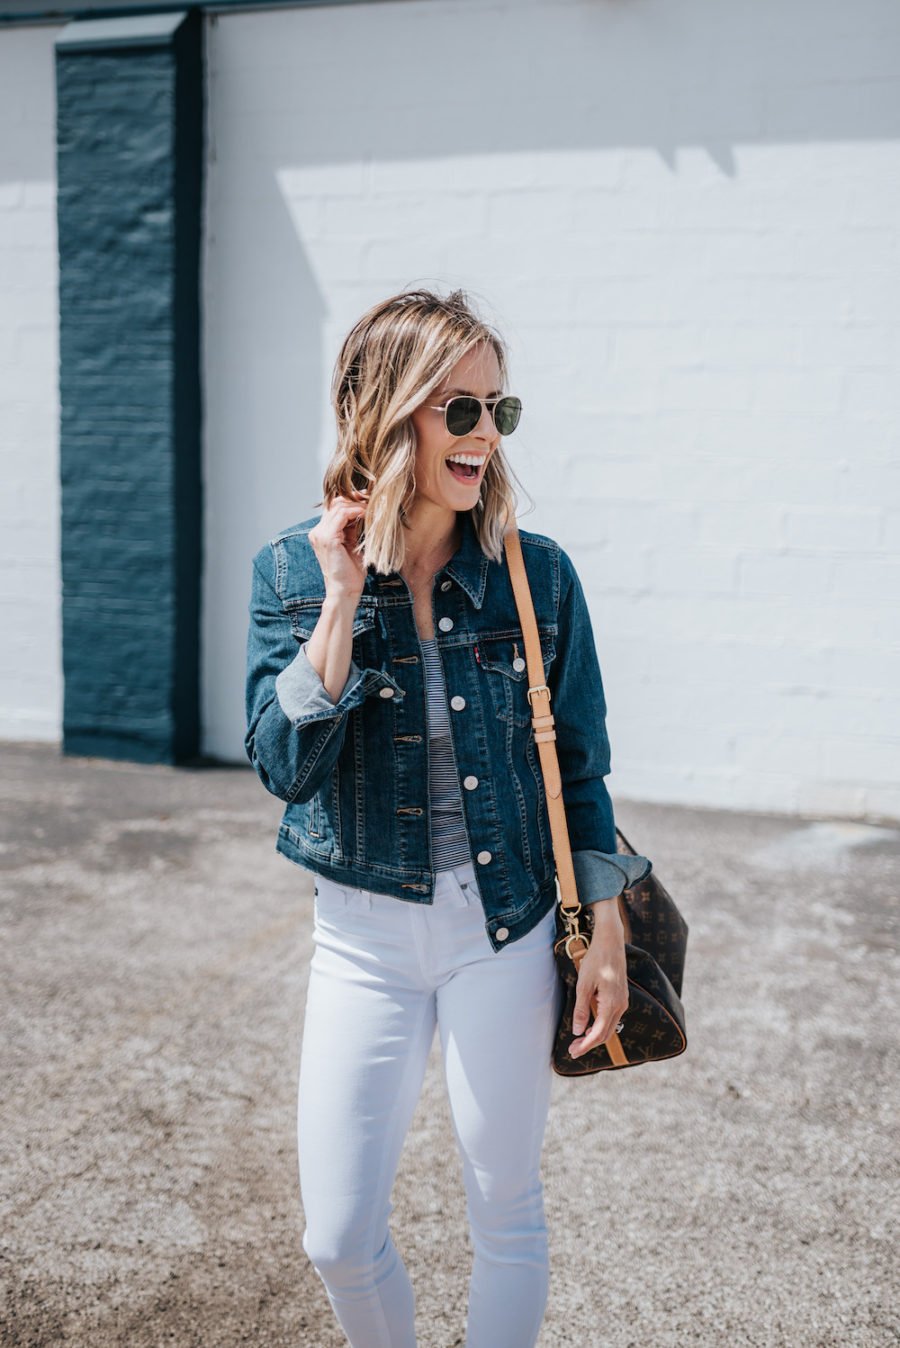 Suzanne wearing a Levi's denim jacket and white denim jeans